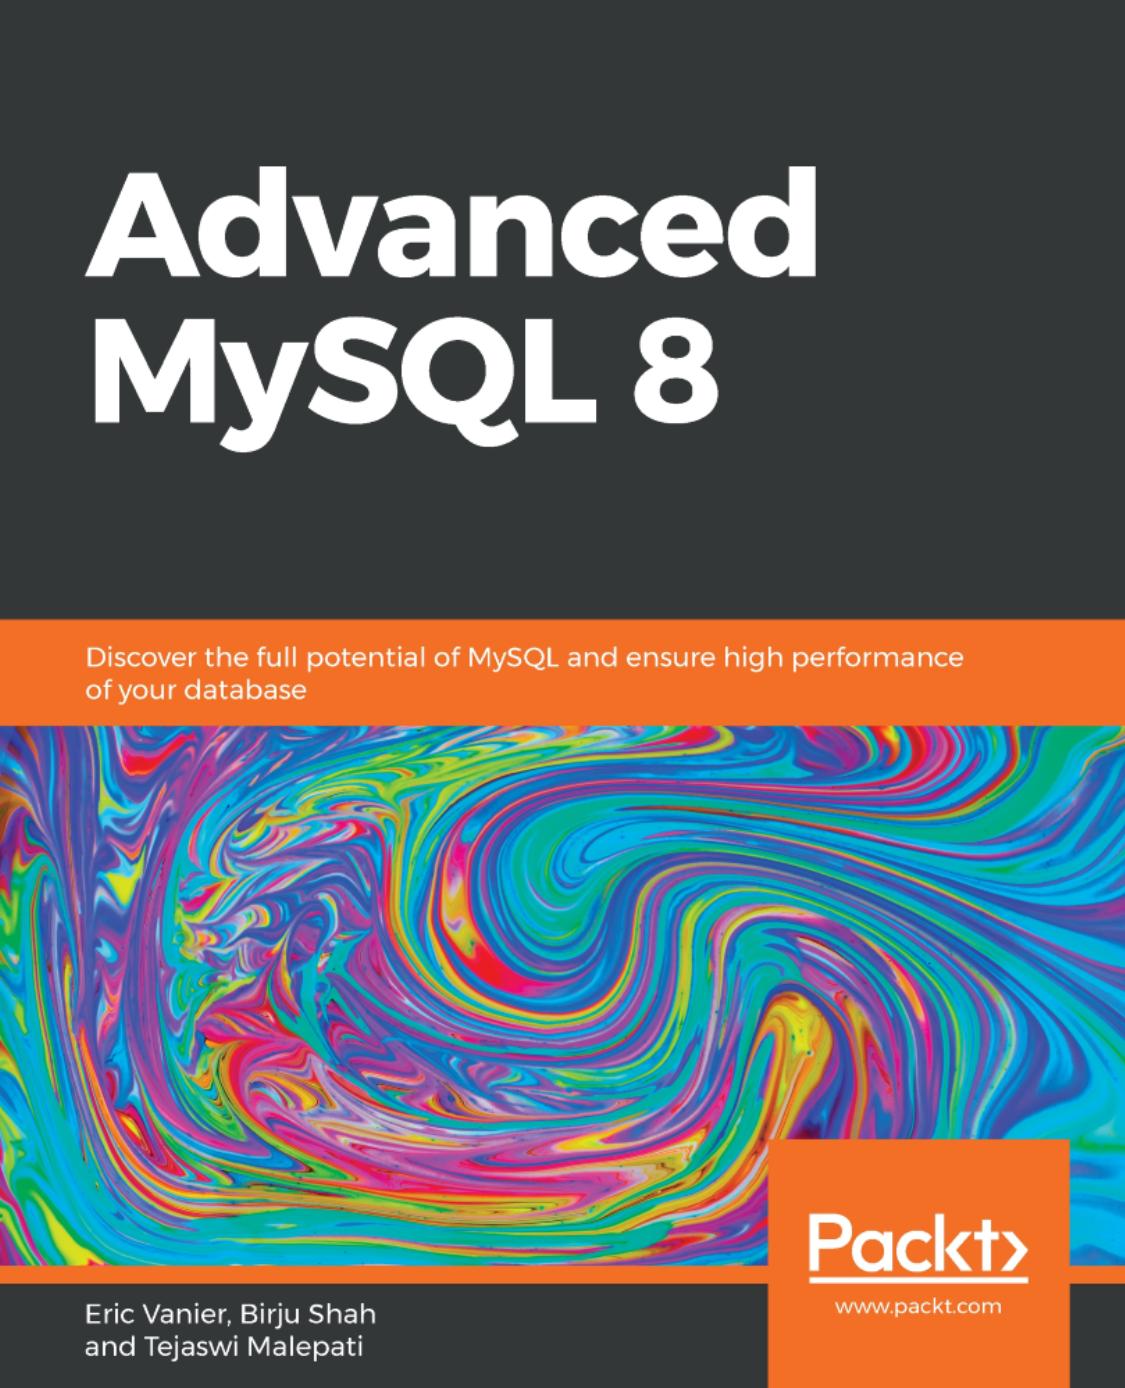 Advanced MySQL 8: Discover the Full Potential of MySQL and Ensure High Performance of Your Database